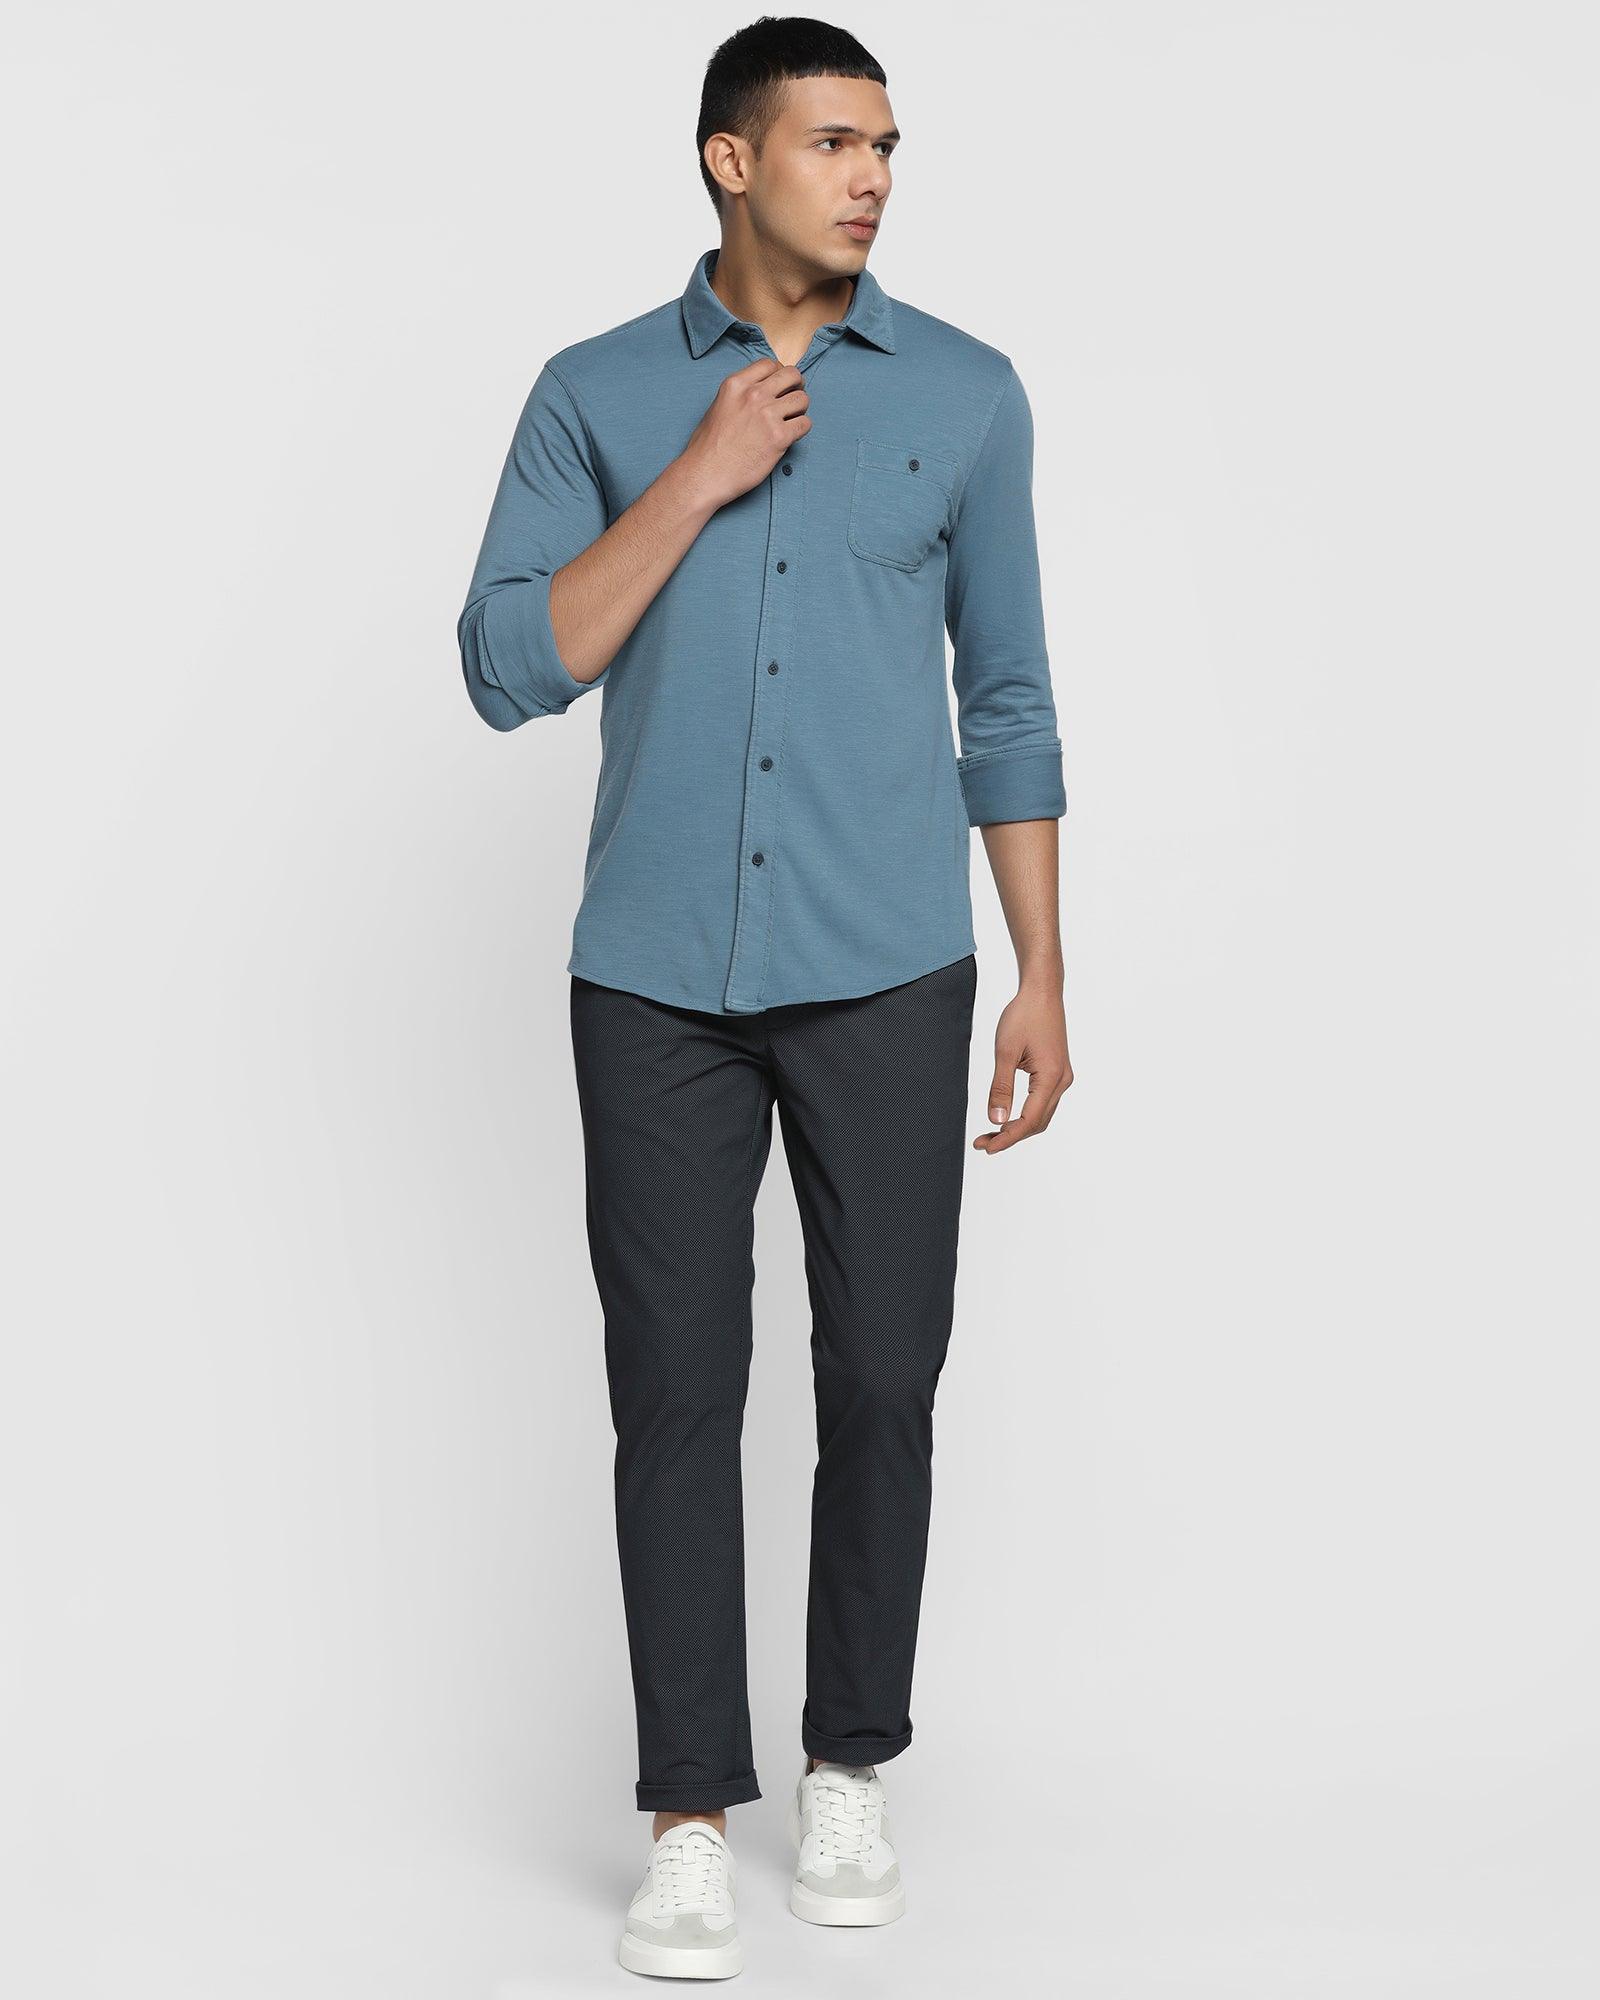 Casual Nautical Blue Solid Shirt - Over